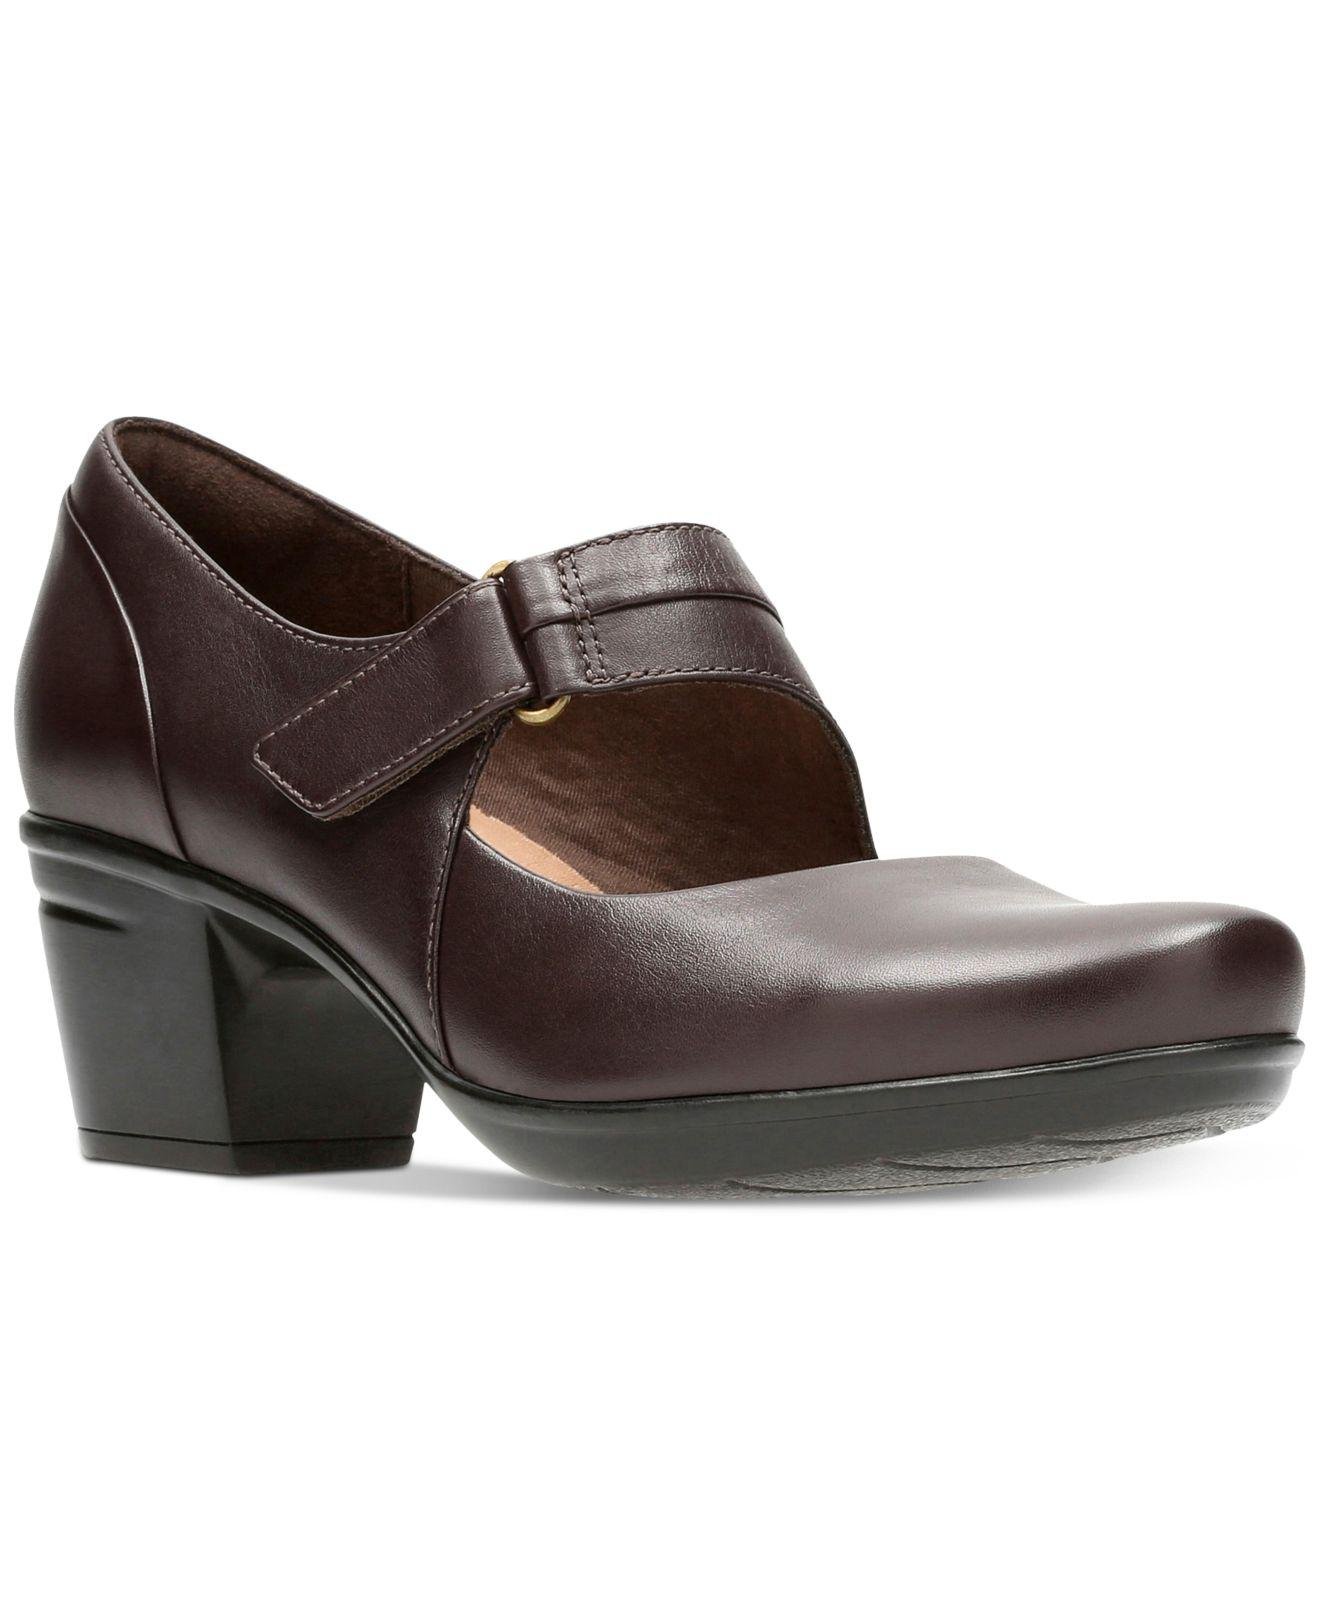 Clarks Leather Women's Emslie Lulin Mary Jane Pumps in